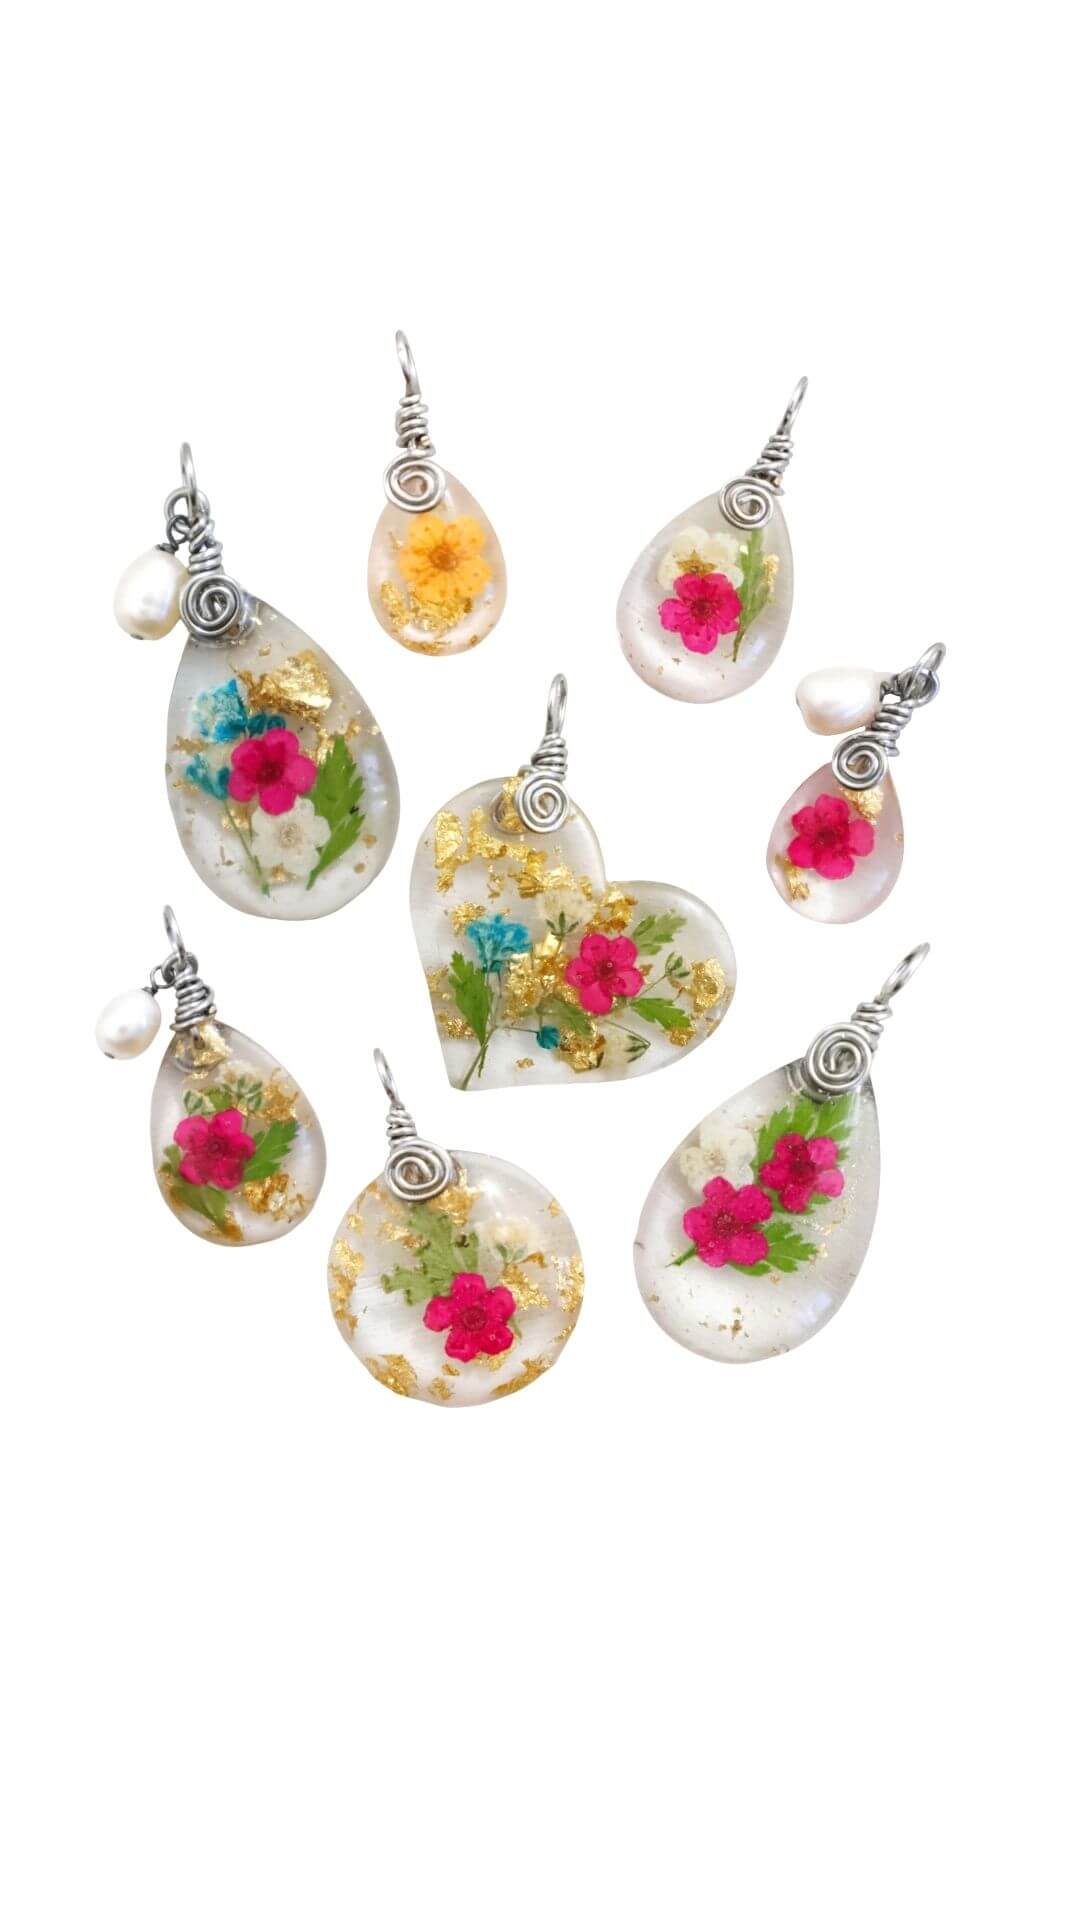 Pressed-Flower-Jewelry-Pendants-Real-Flower-Jewelry-Kaleidoscopes-And-Polka-Dots